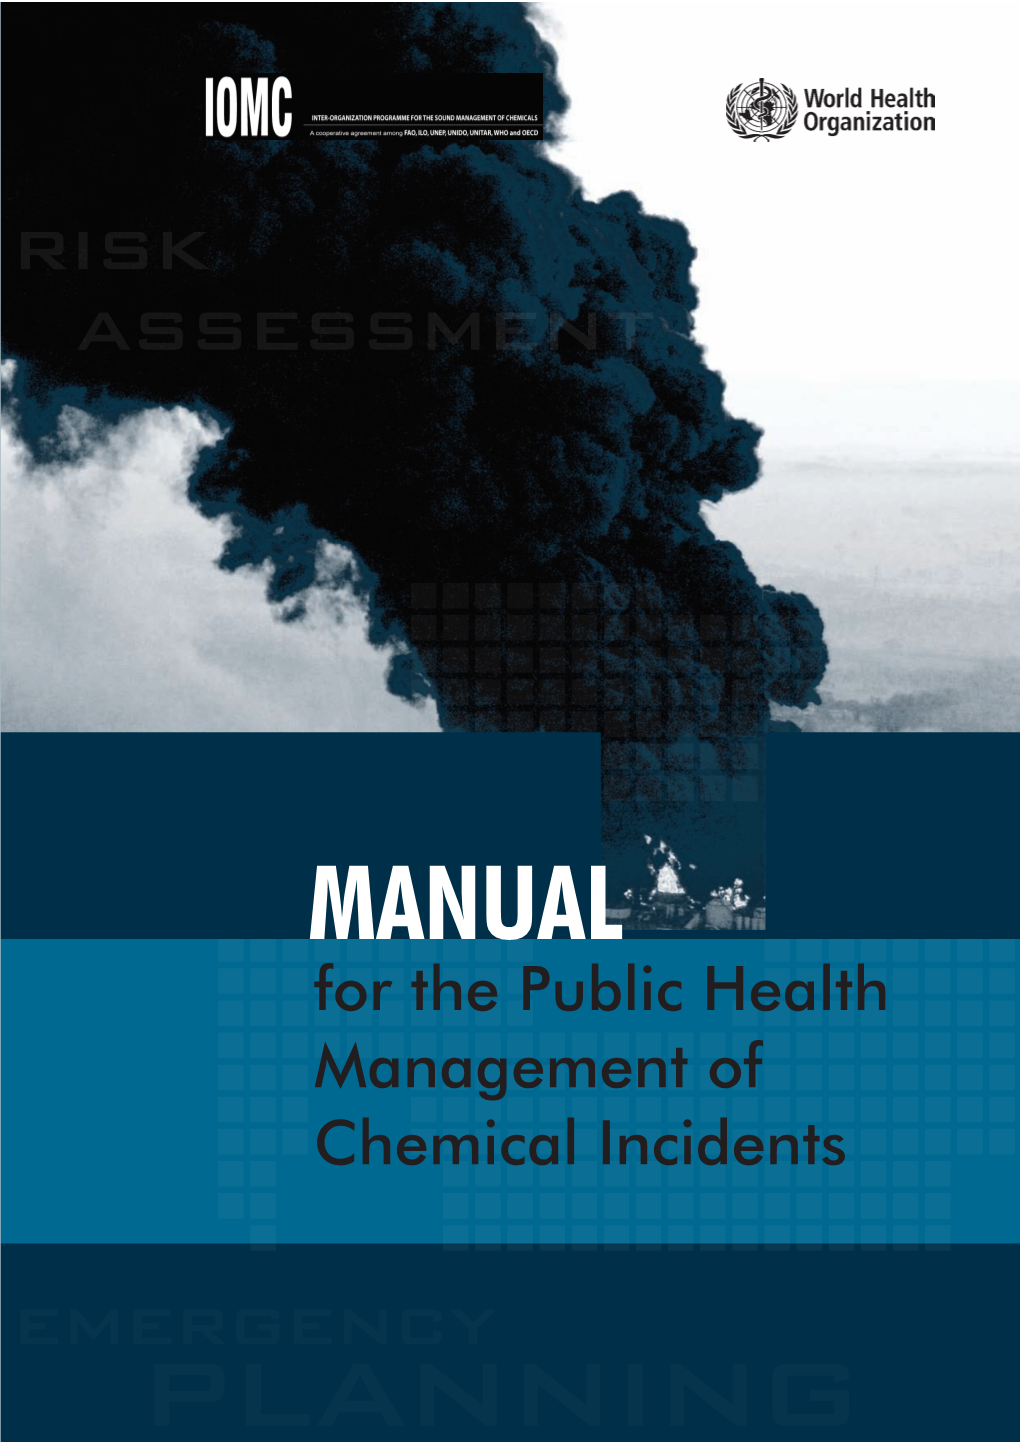 MANUAL Crisis Communication for the Public Health Management of Chemical Incidents